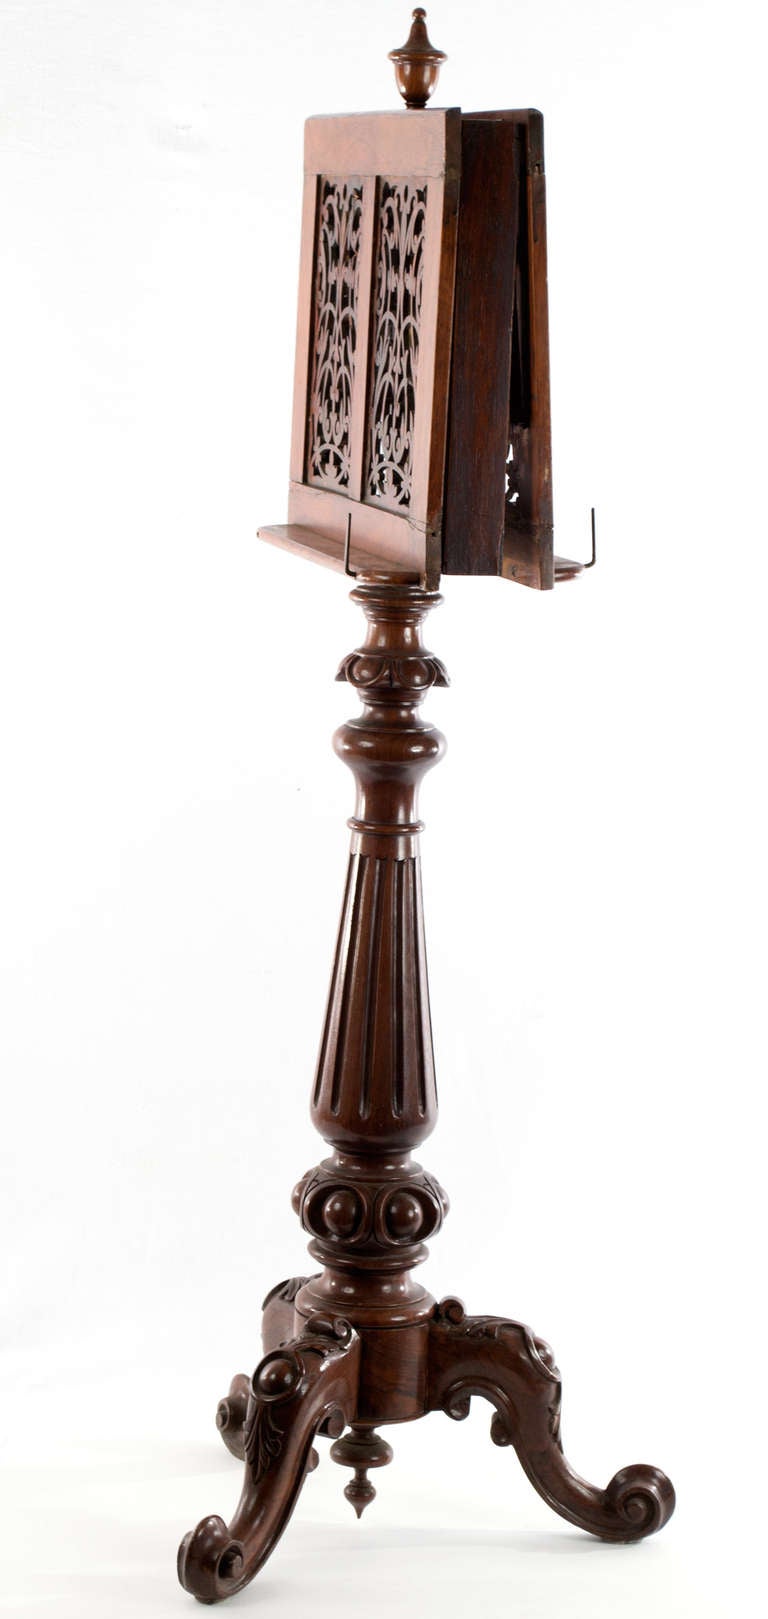 Carved from solid mahogany, this lectern or music stand folds inward for storage and can be adjusted in height — using hinges and inner workings made or solid brass. The faces of the stands are exquisitely pierced carvings of foliage sprays and